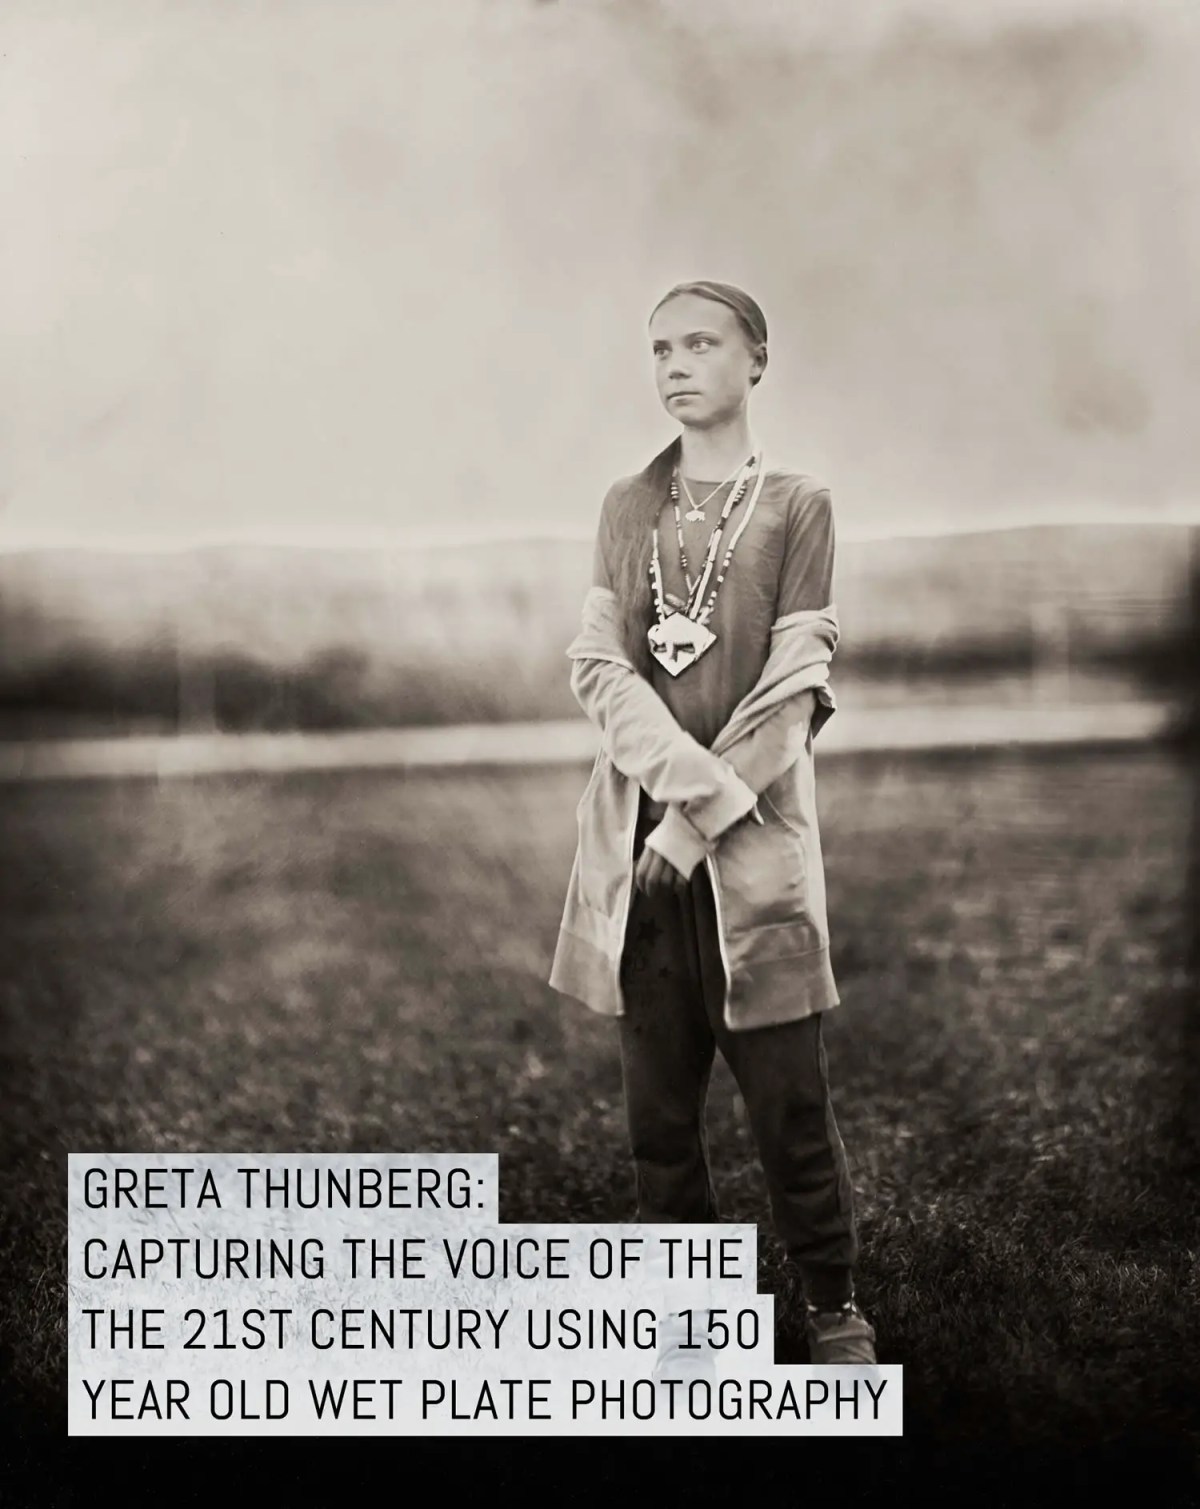 Greta Thunberg: capturing the voice of the 21st century using 150-year-old wet plate photography